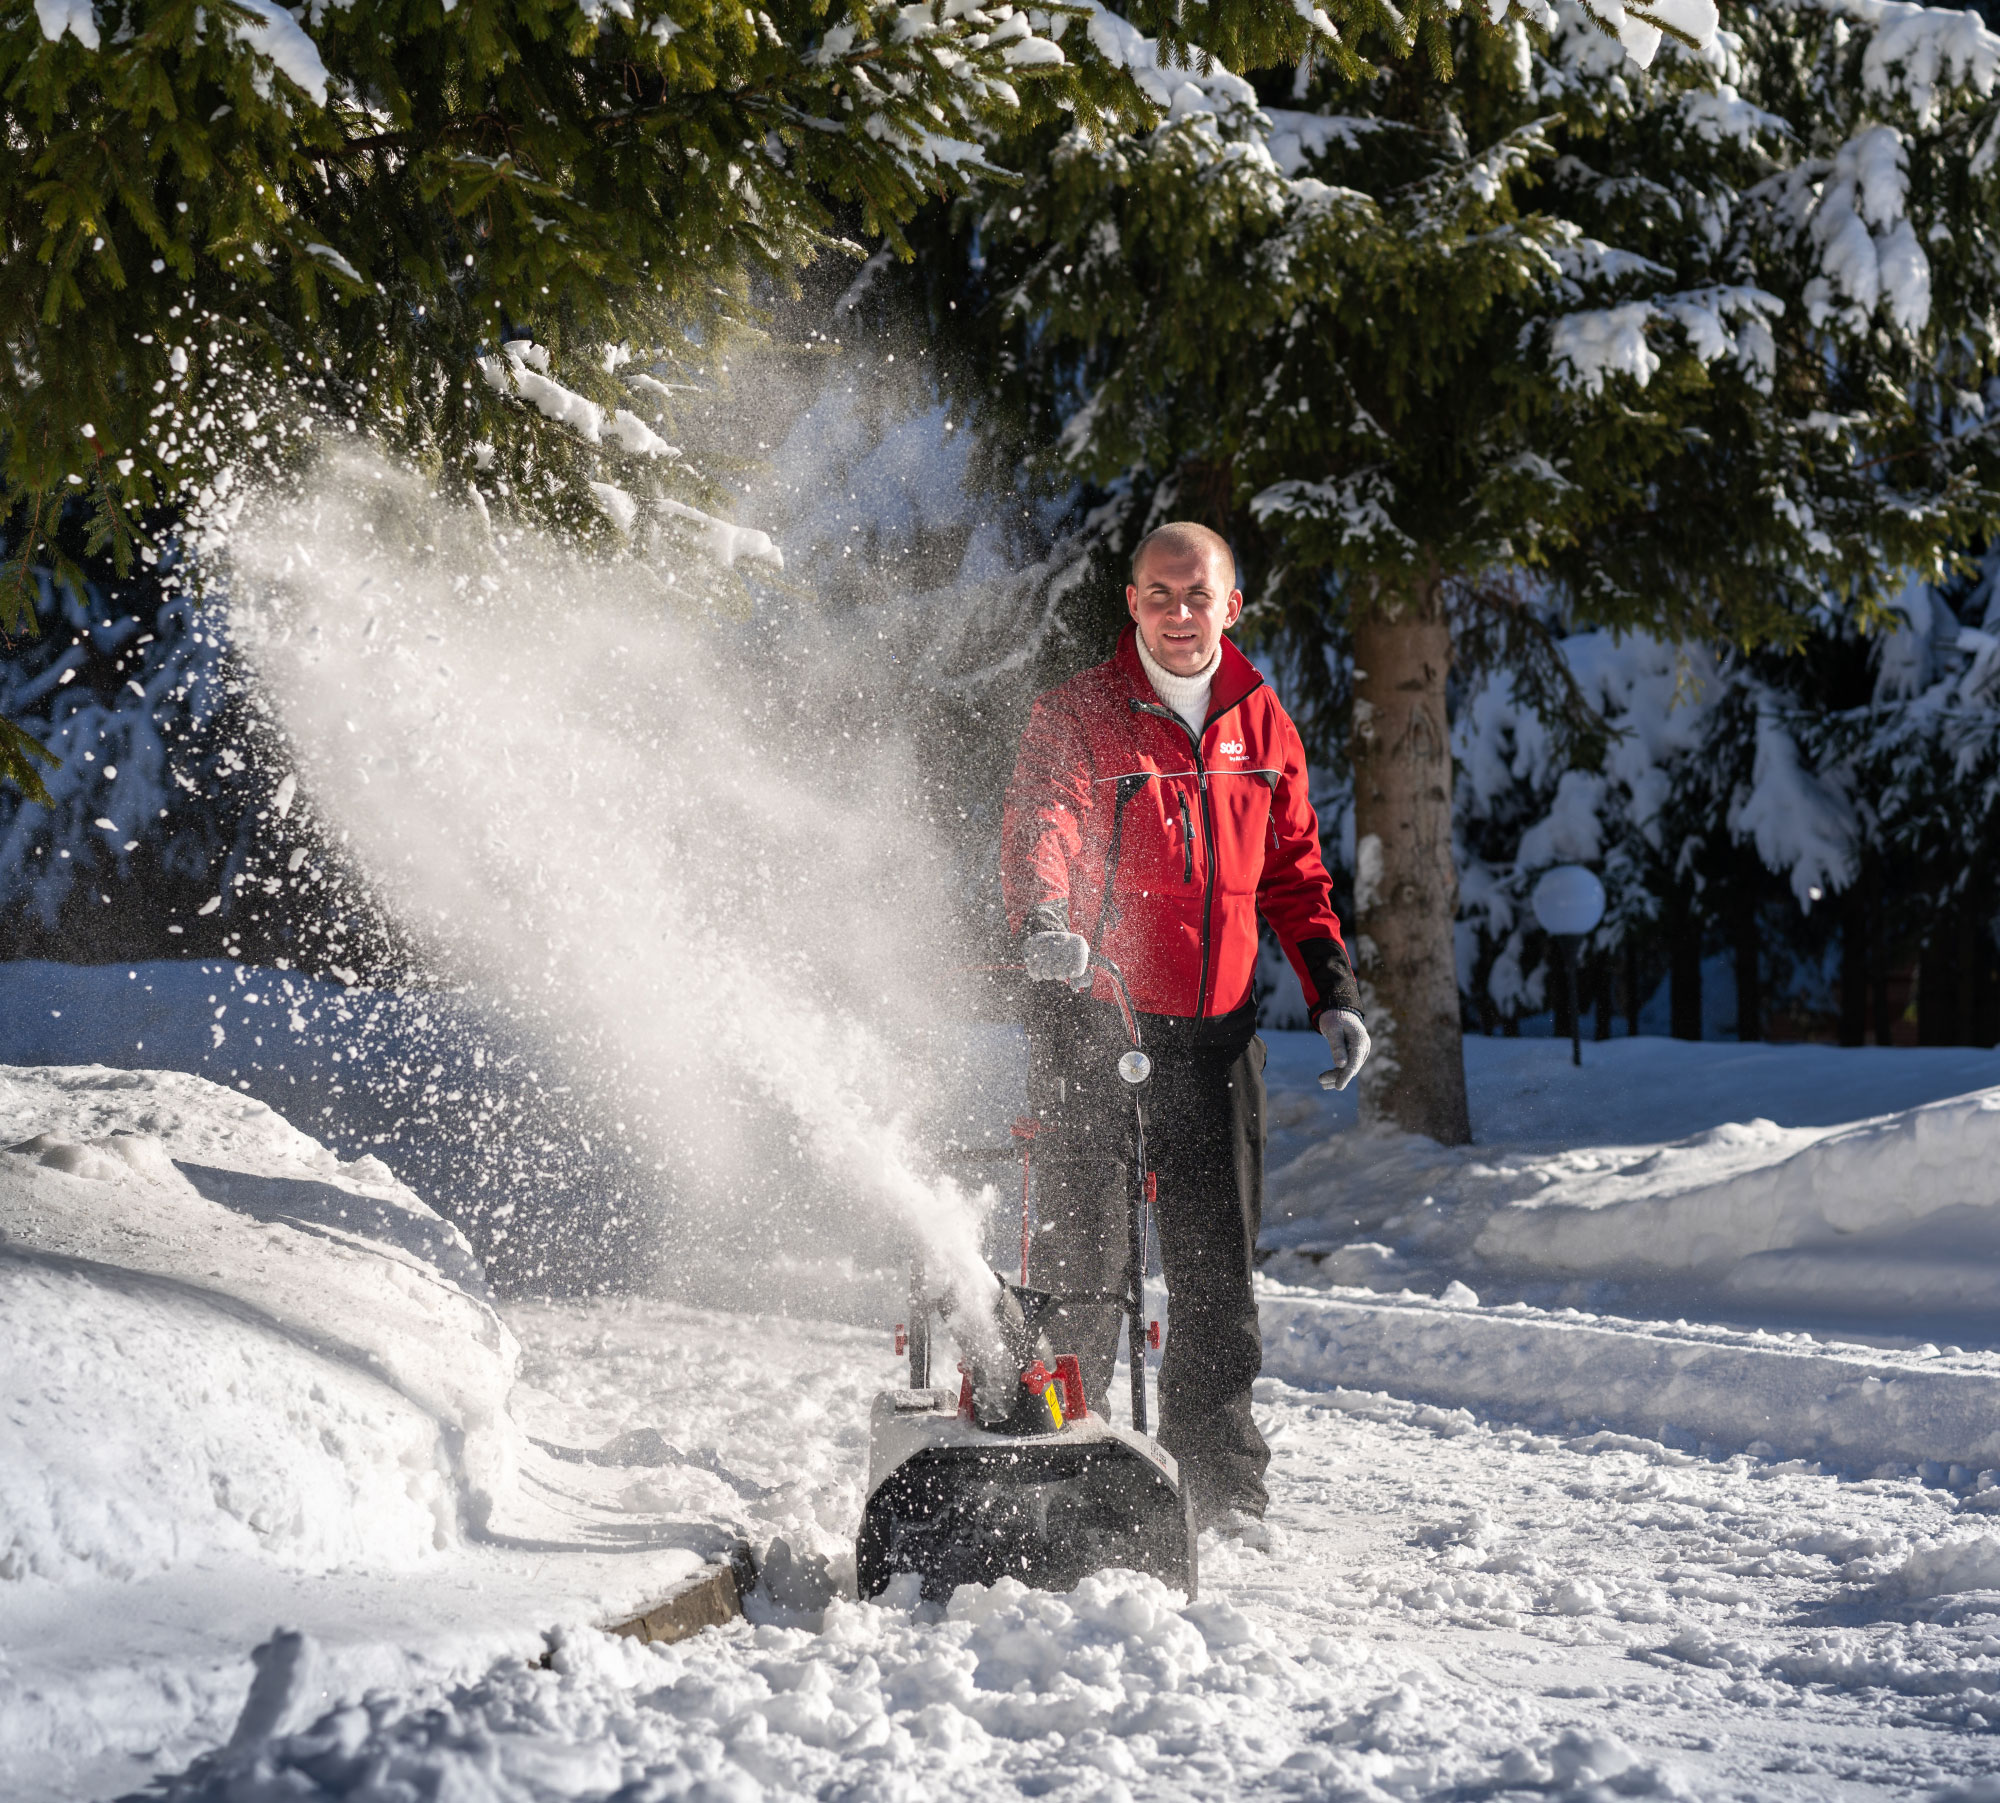 A snow blower is essential equipment for a snowy winter